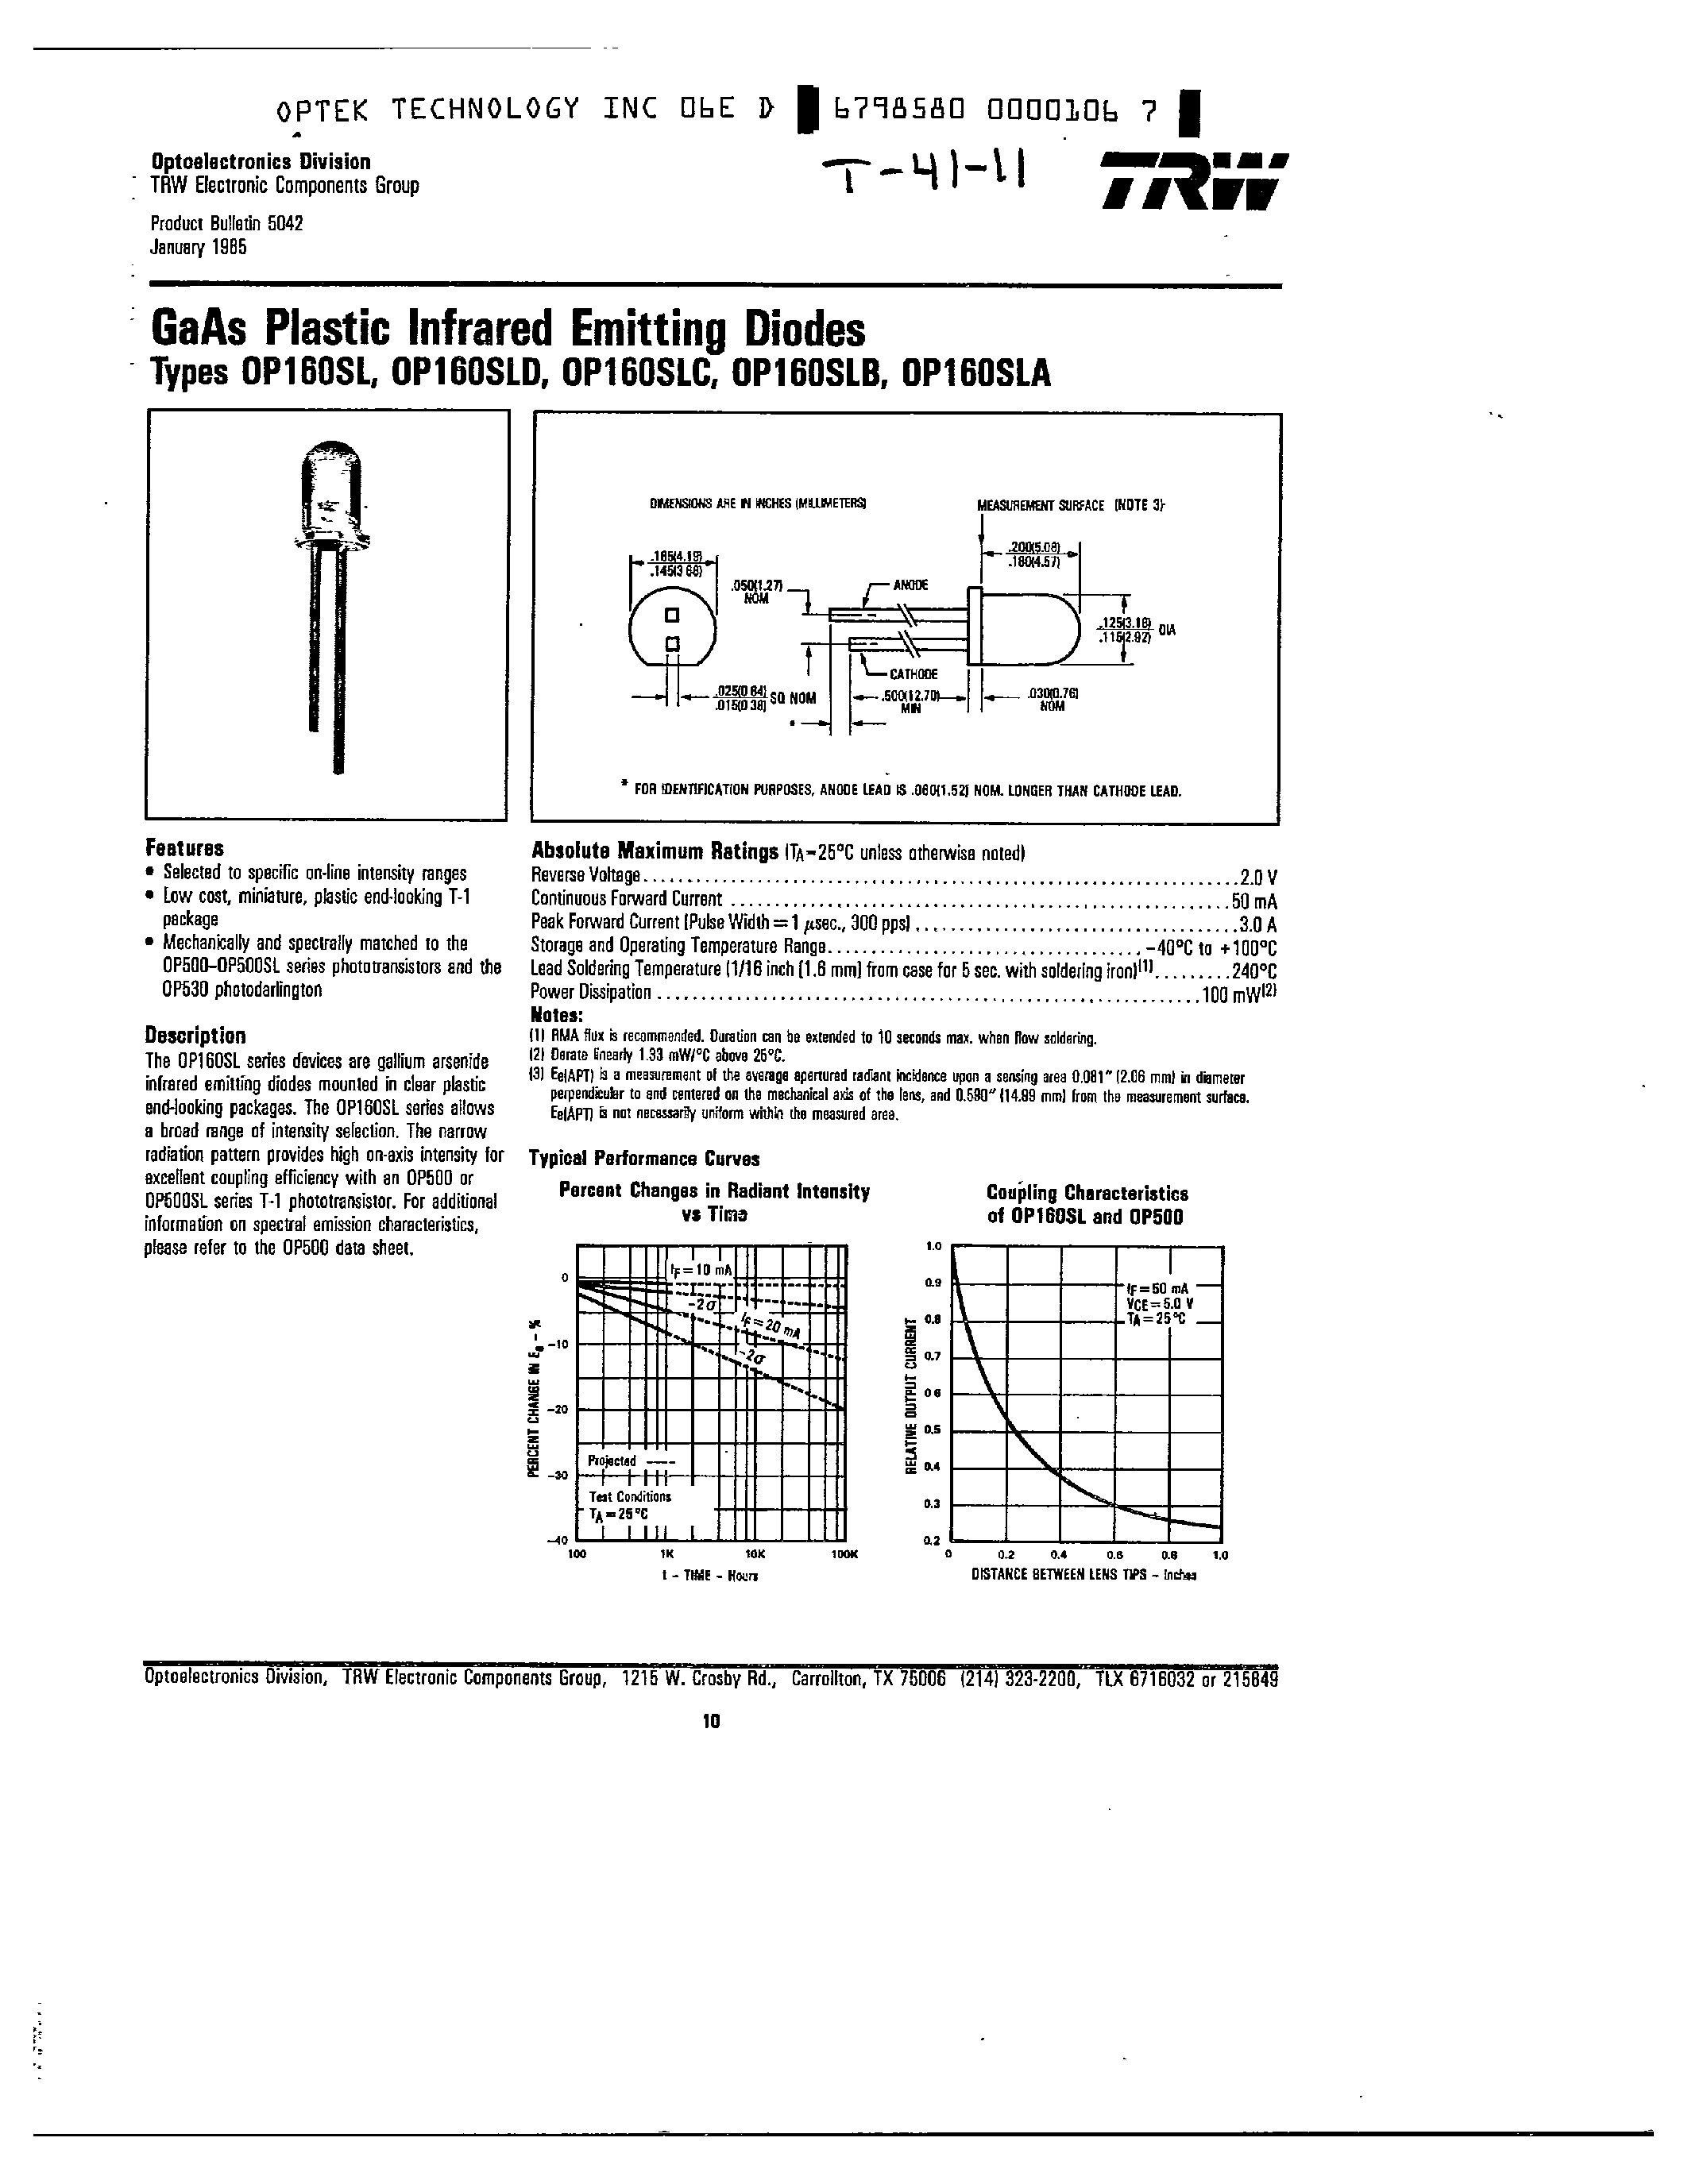 Datasheet OP160SLB - GAAS PLASTIC INFRARED EMITTING DIODES page 1